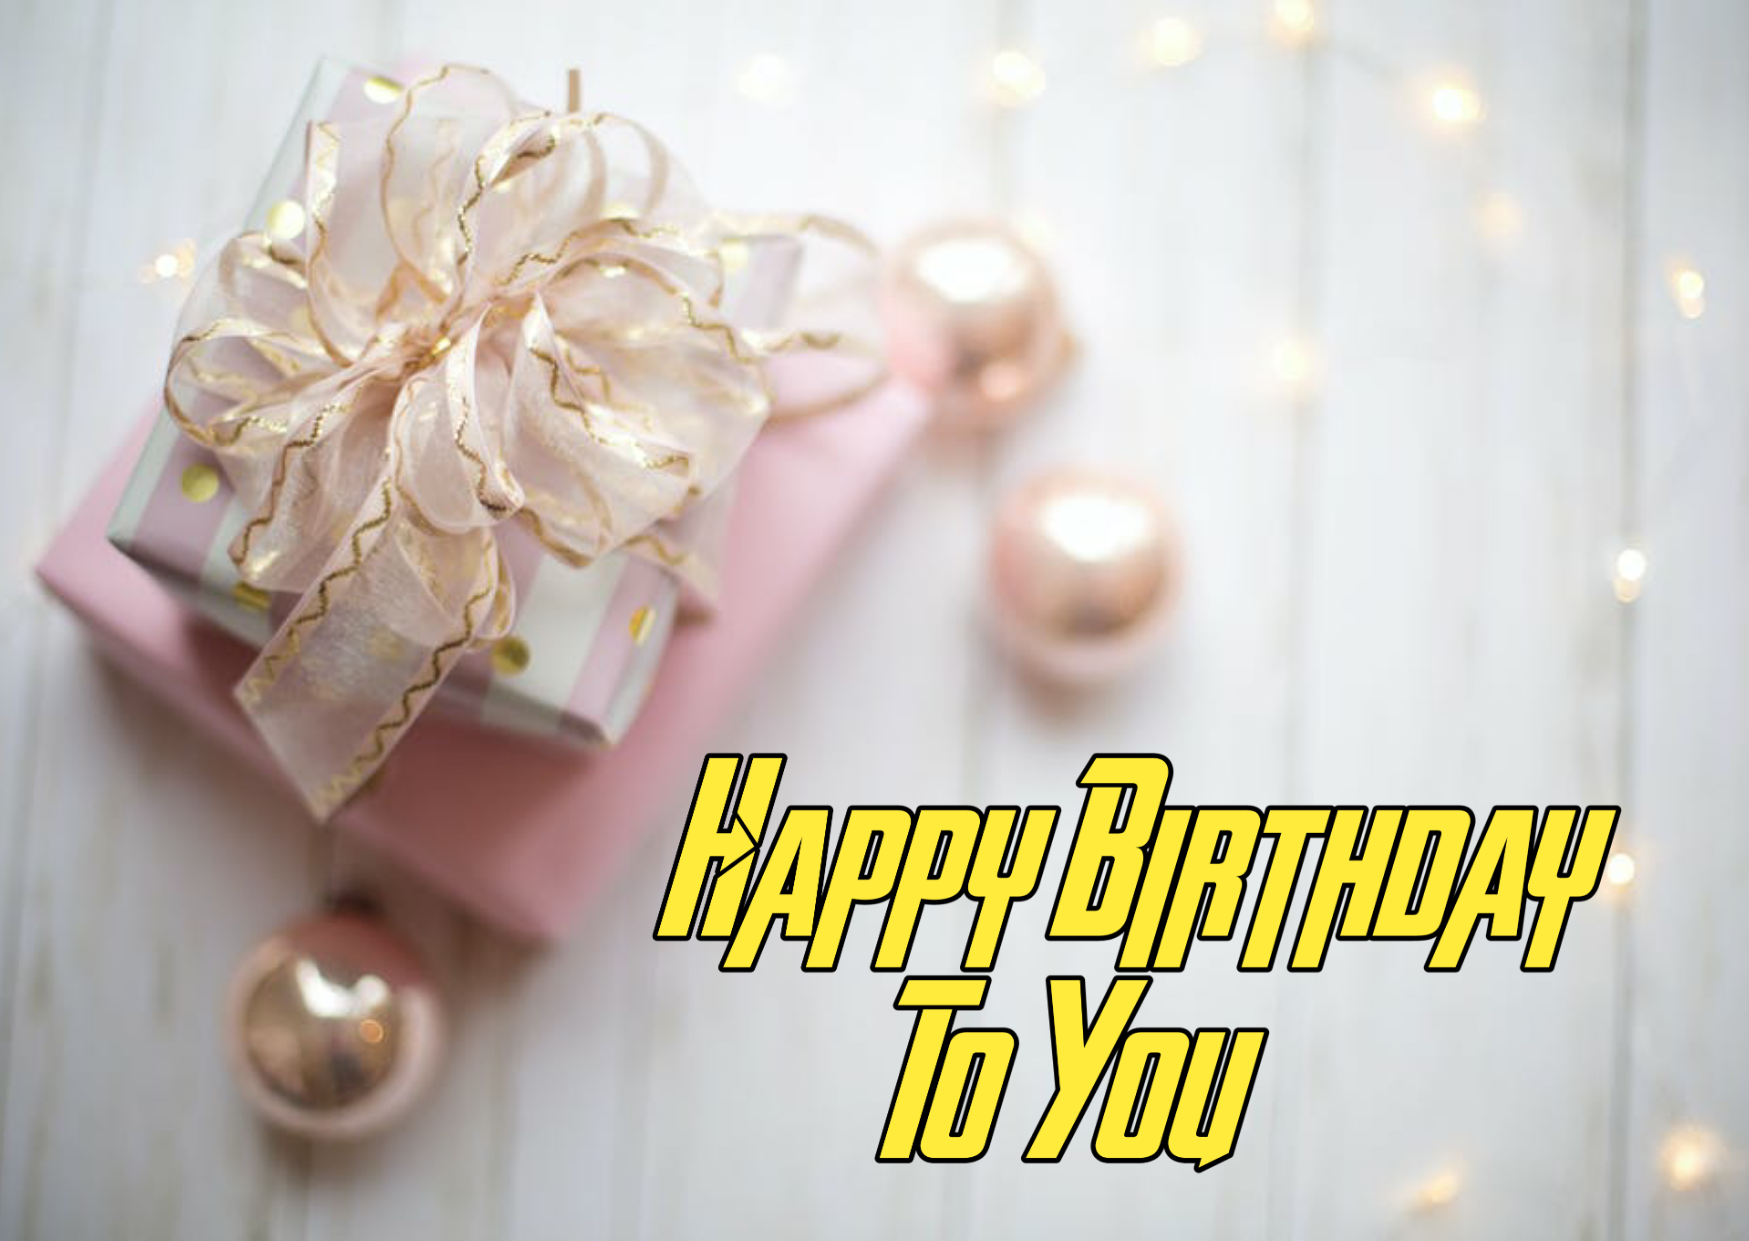 Best Happy Birthday Son Wishes, HD Images, Status, SMS, Quotes in English